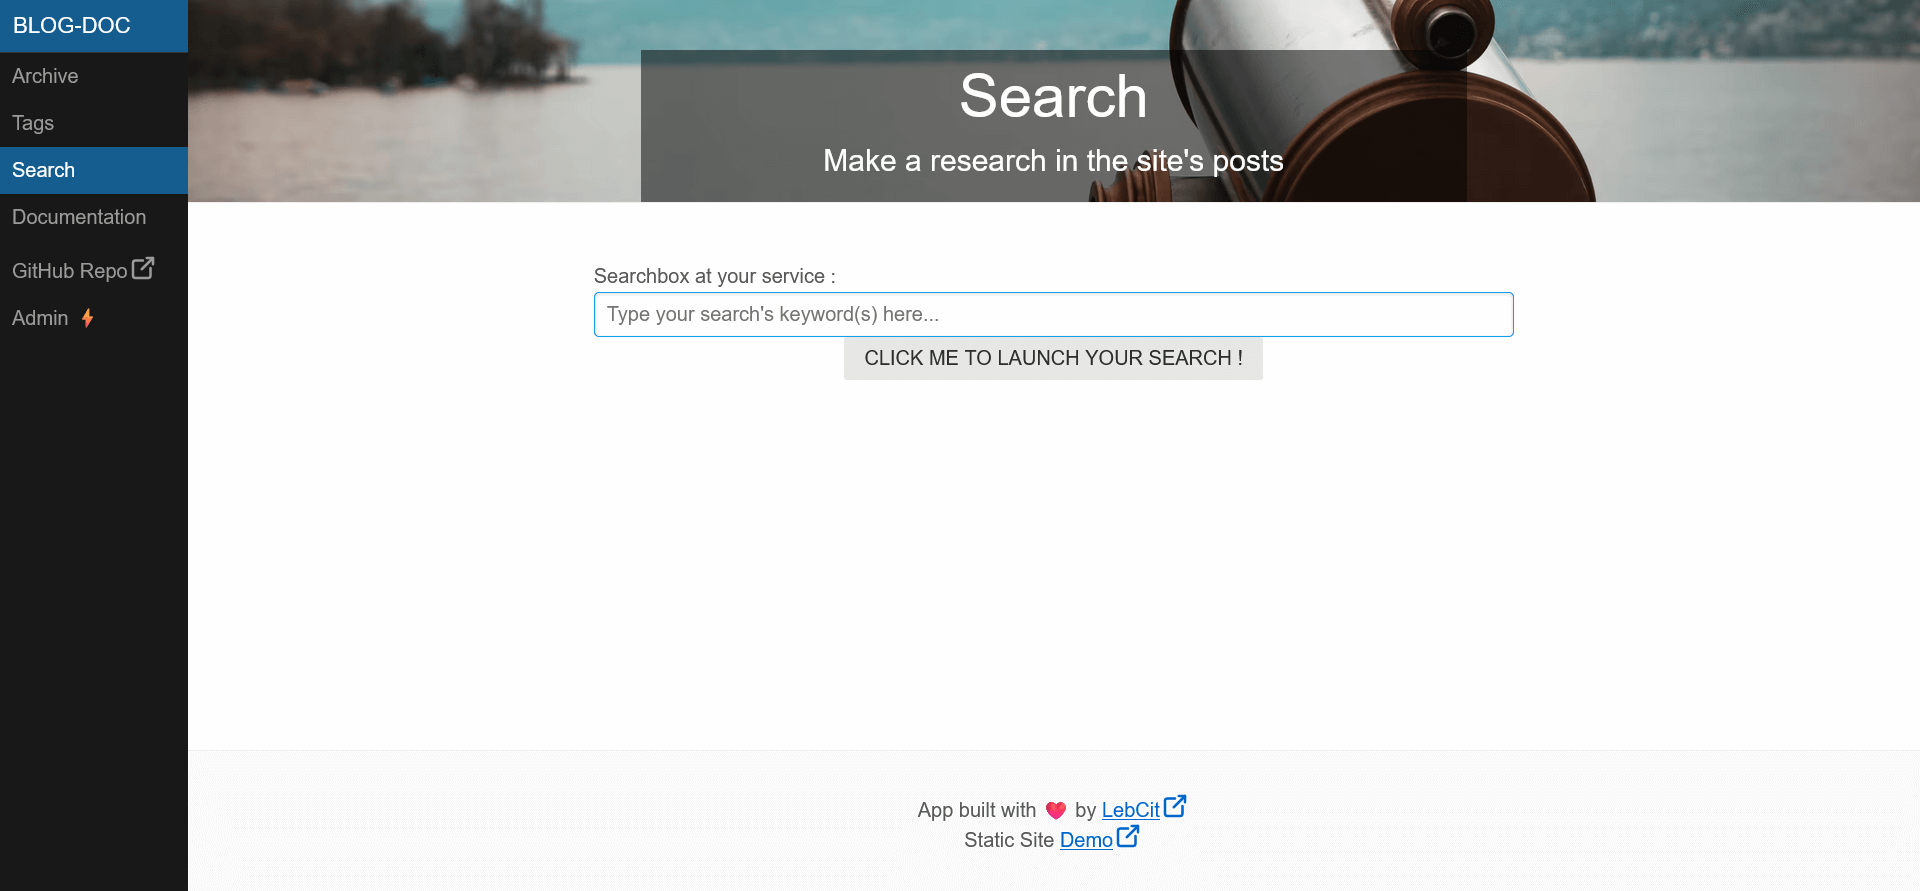 Screenshot of Blog-Doc search page